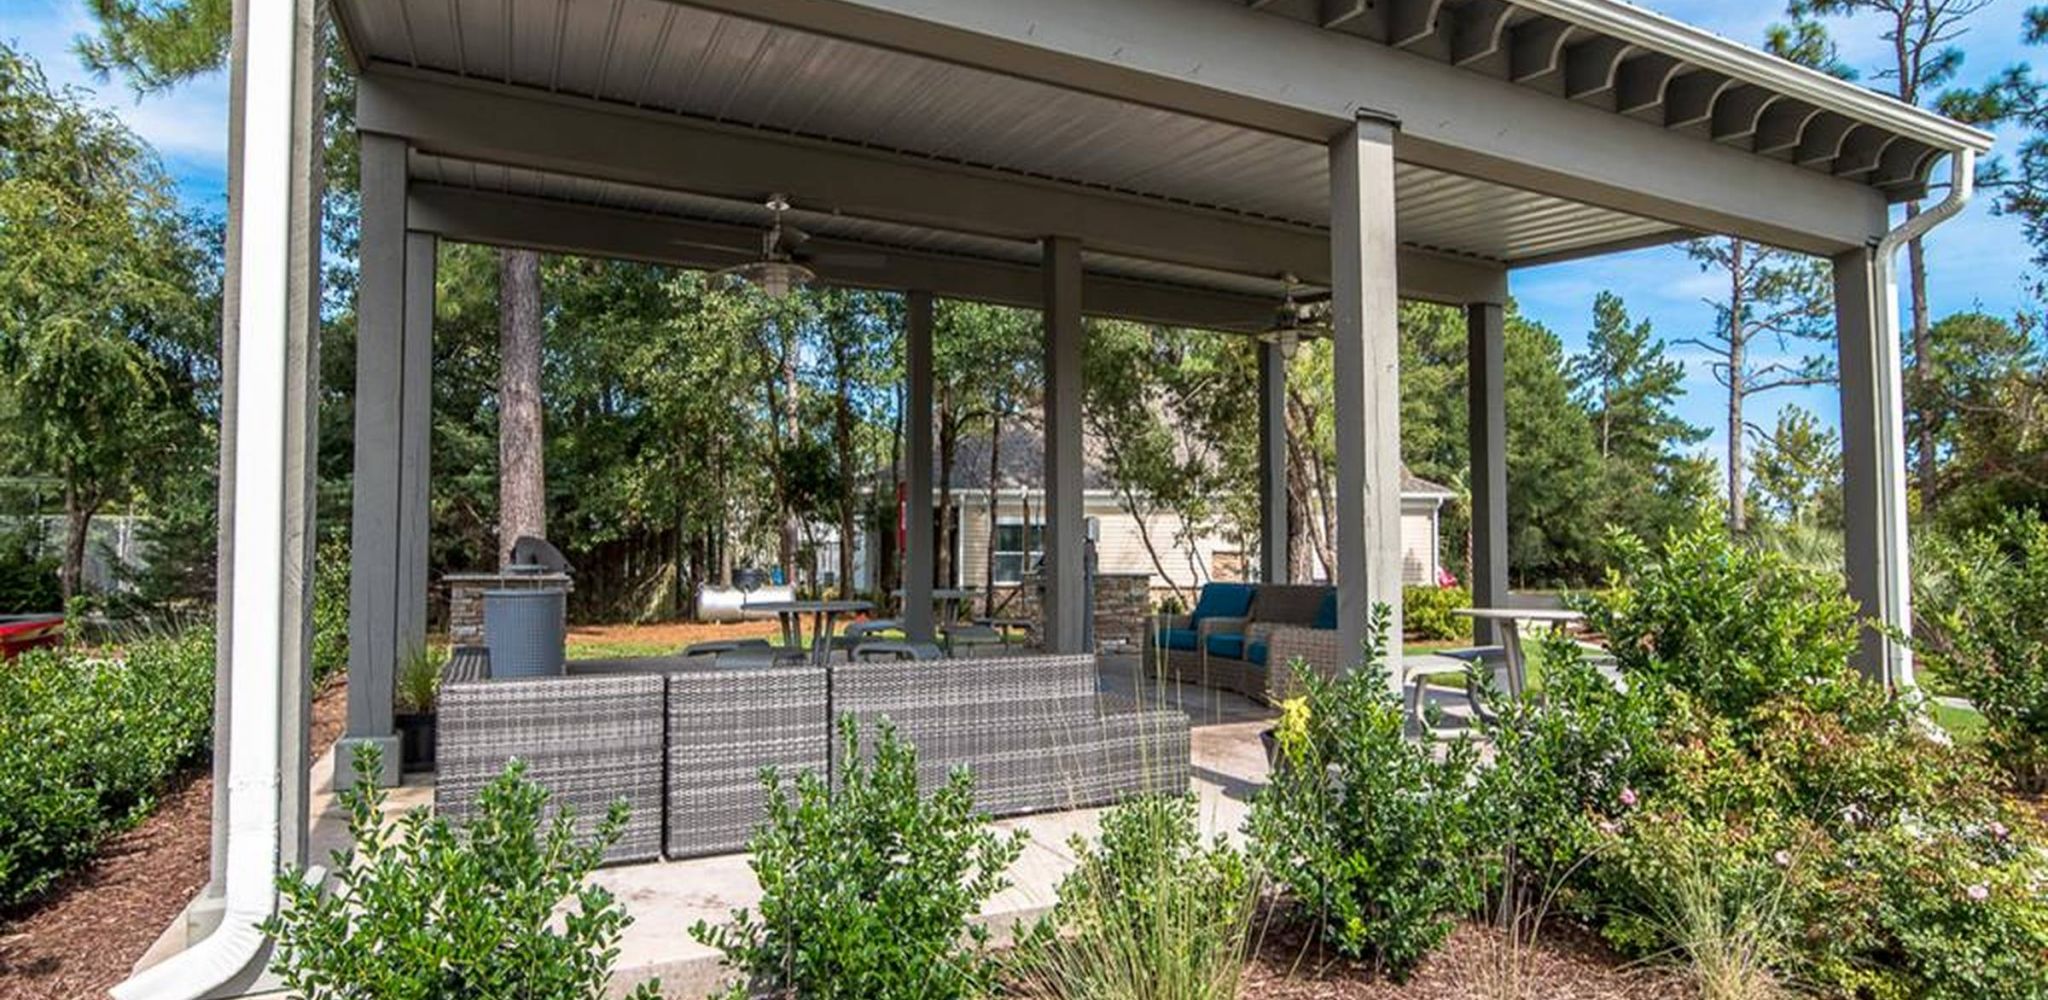 Hawthorne at New Centre outdoor lounge amenity area in Wilmington, NC